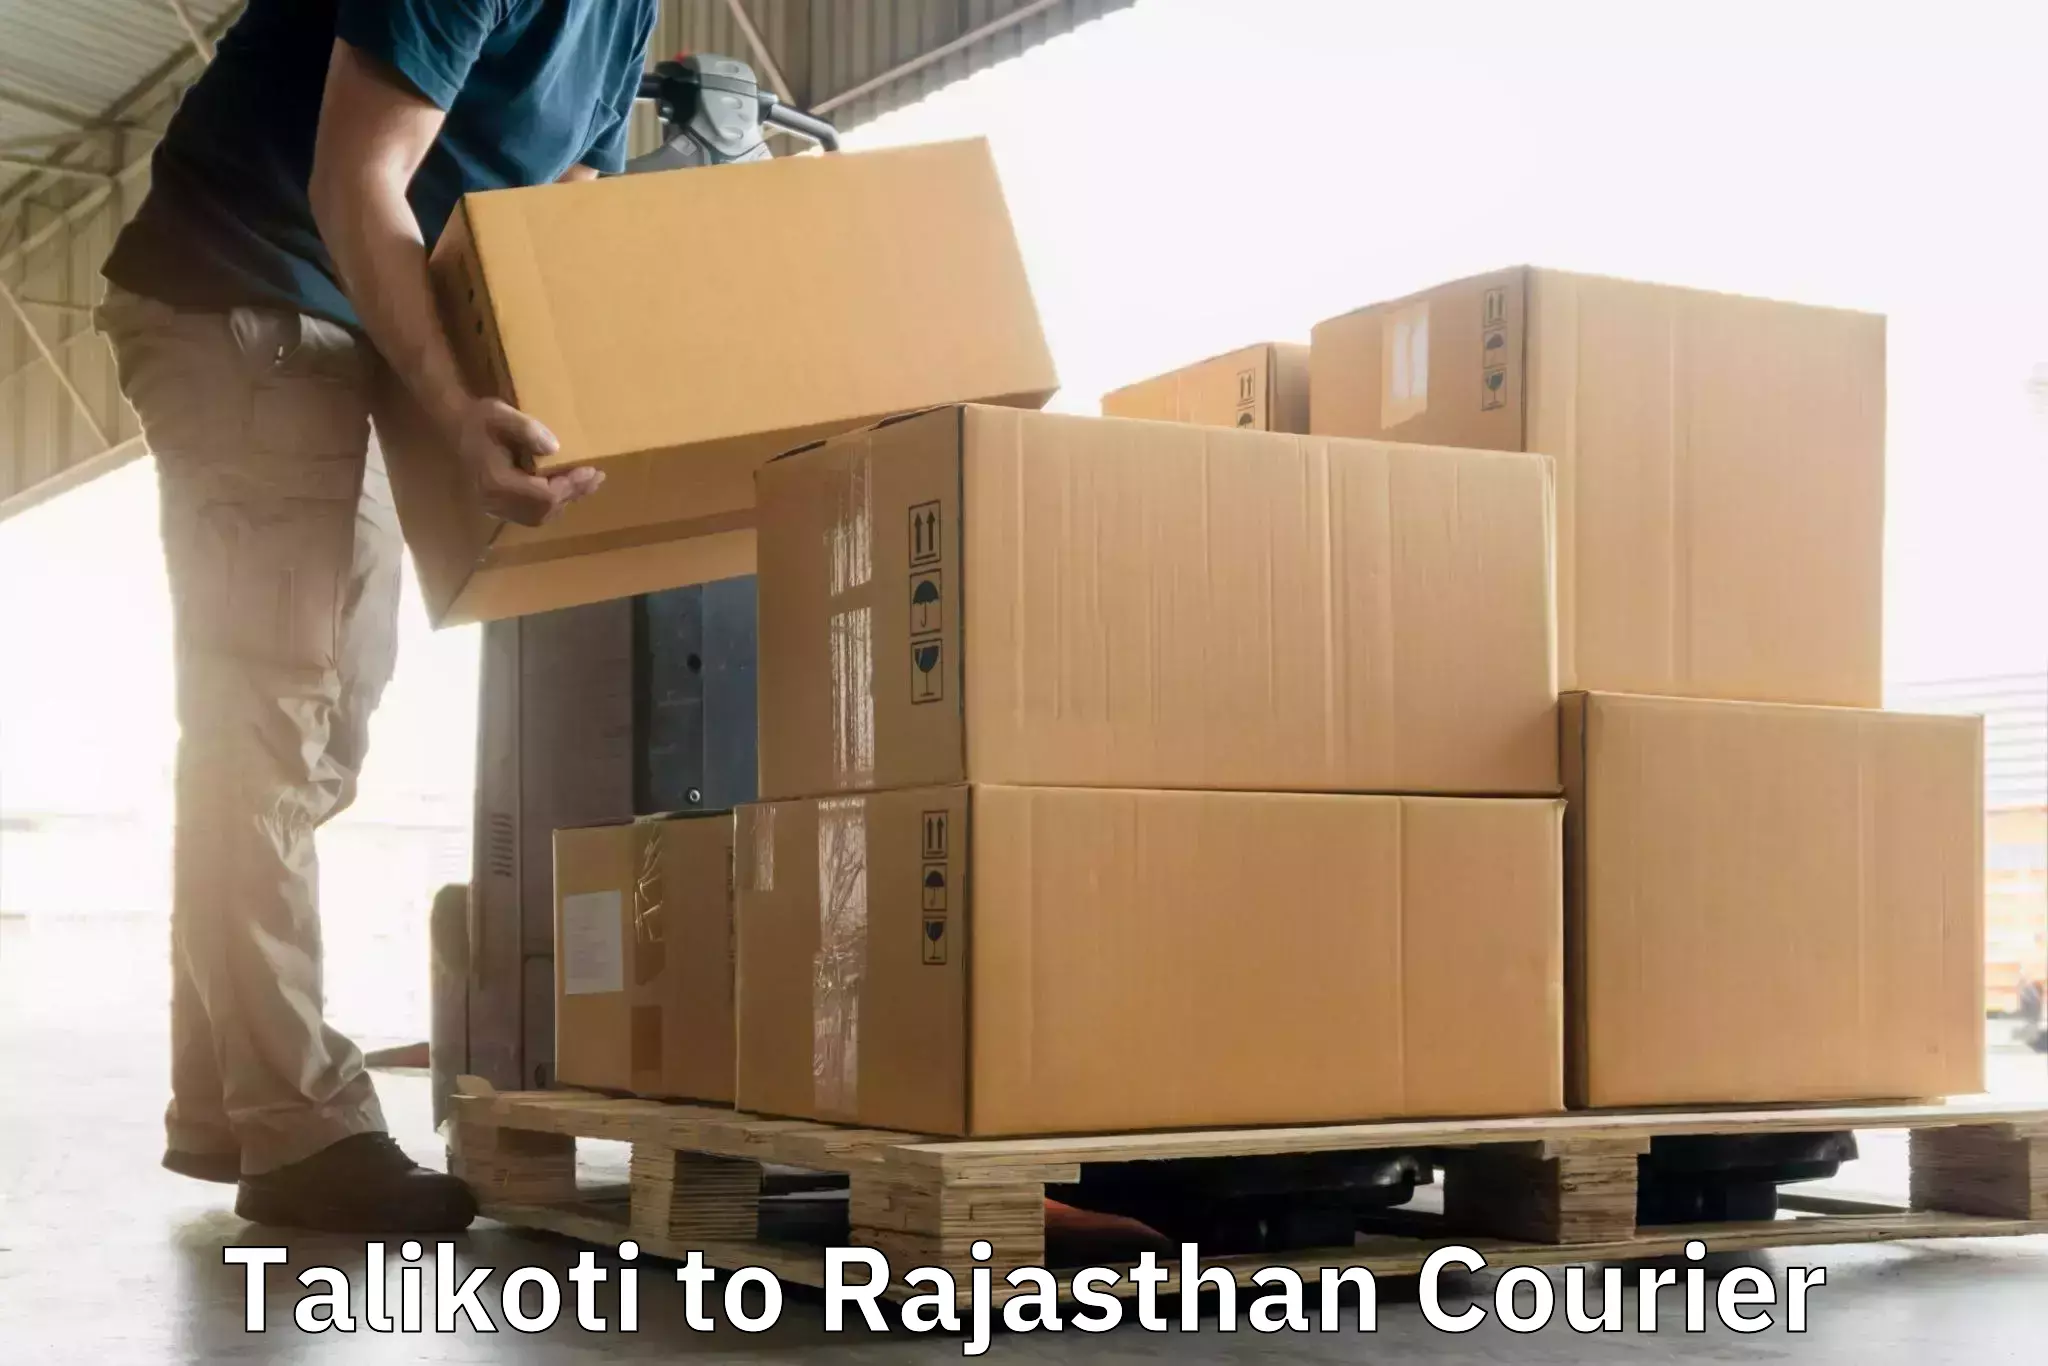 Nationwide parcel services Talikoti to Suratgarh